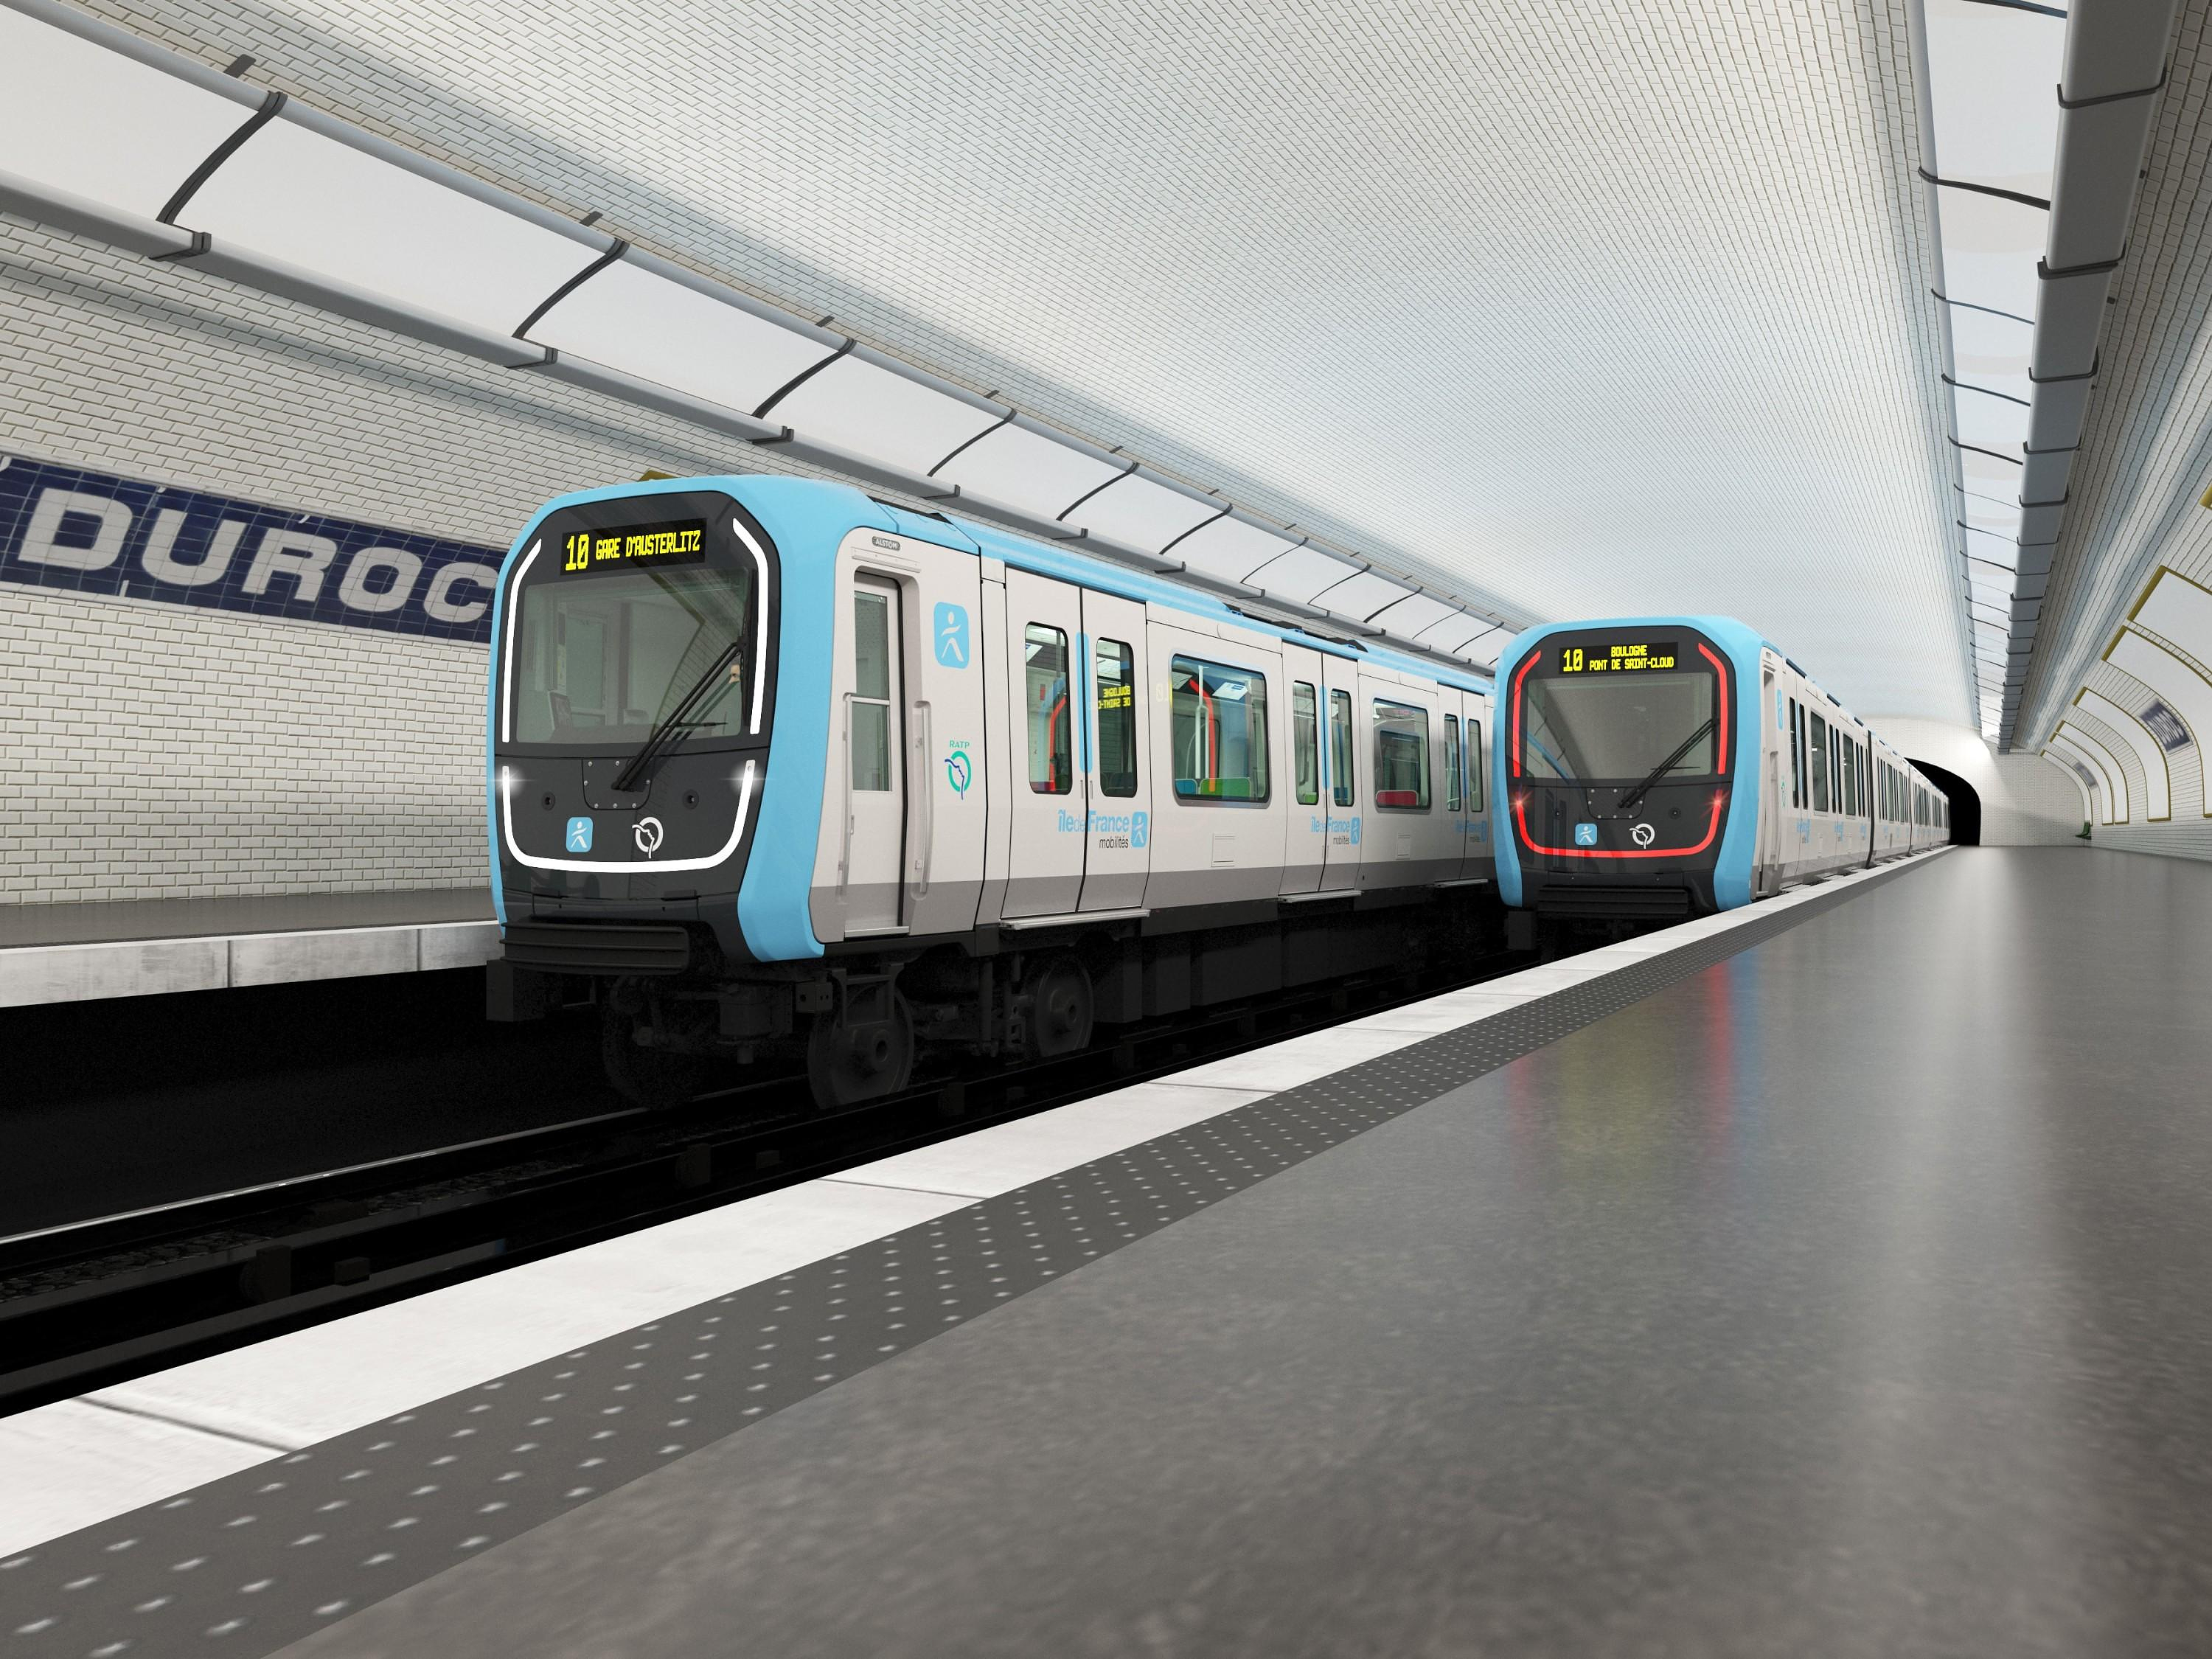 Île-de-France Mobilités orders 103 new metro trains from Alstom for nearly 1.1 billion euros